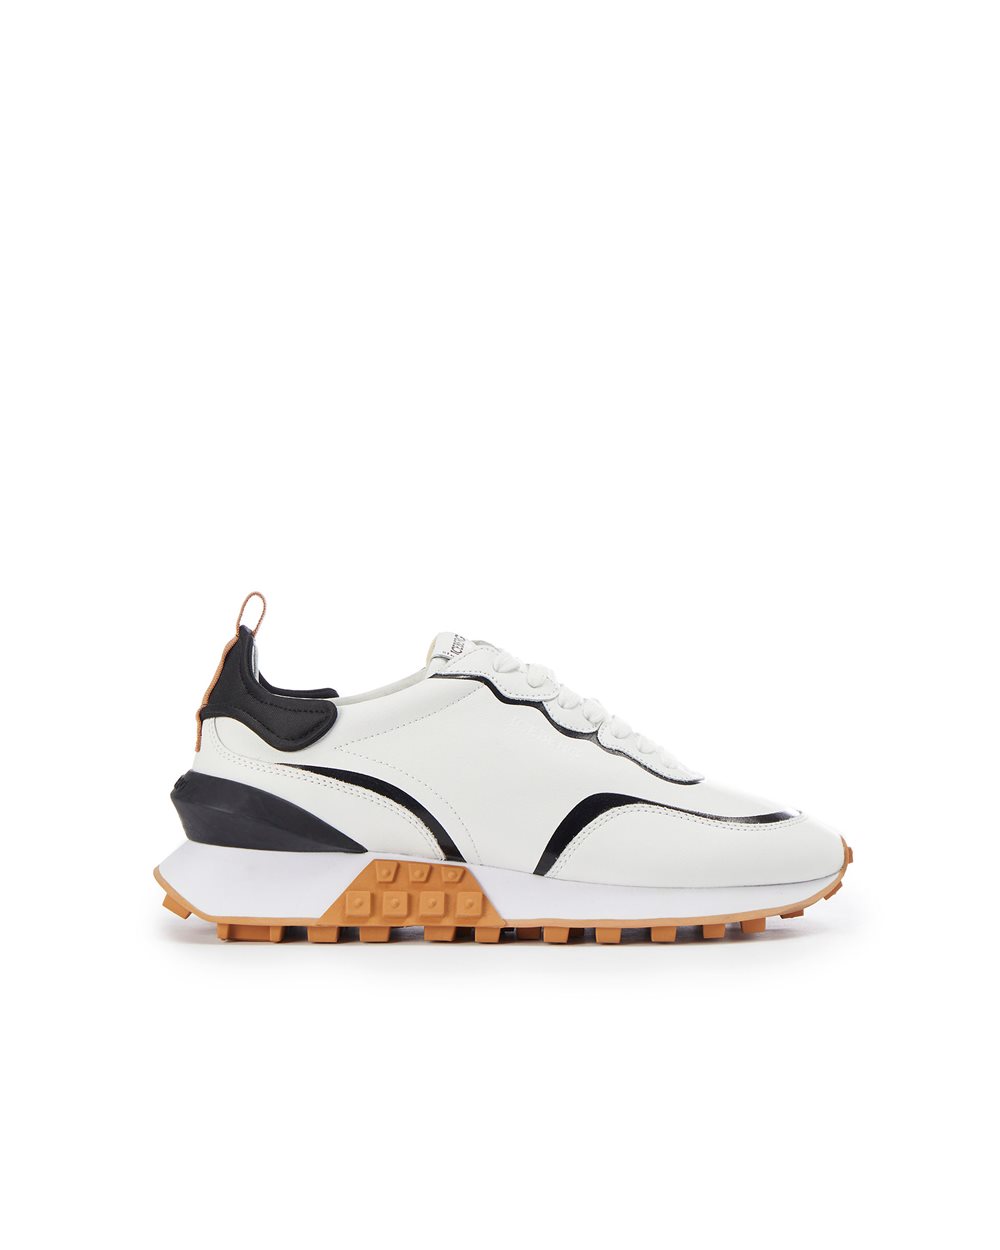 Hyper two-tone sneakers - ( PRIMO STEP IT ) PROMO SALDI UP TO 30% | Iceberg - Official Website